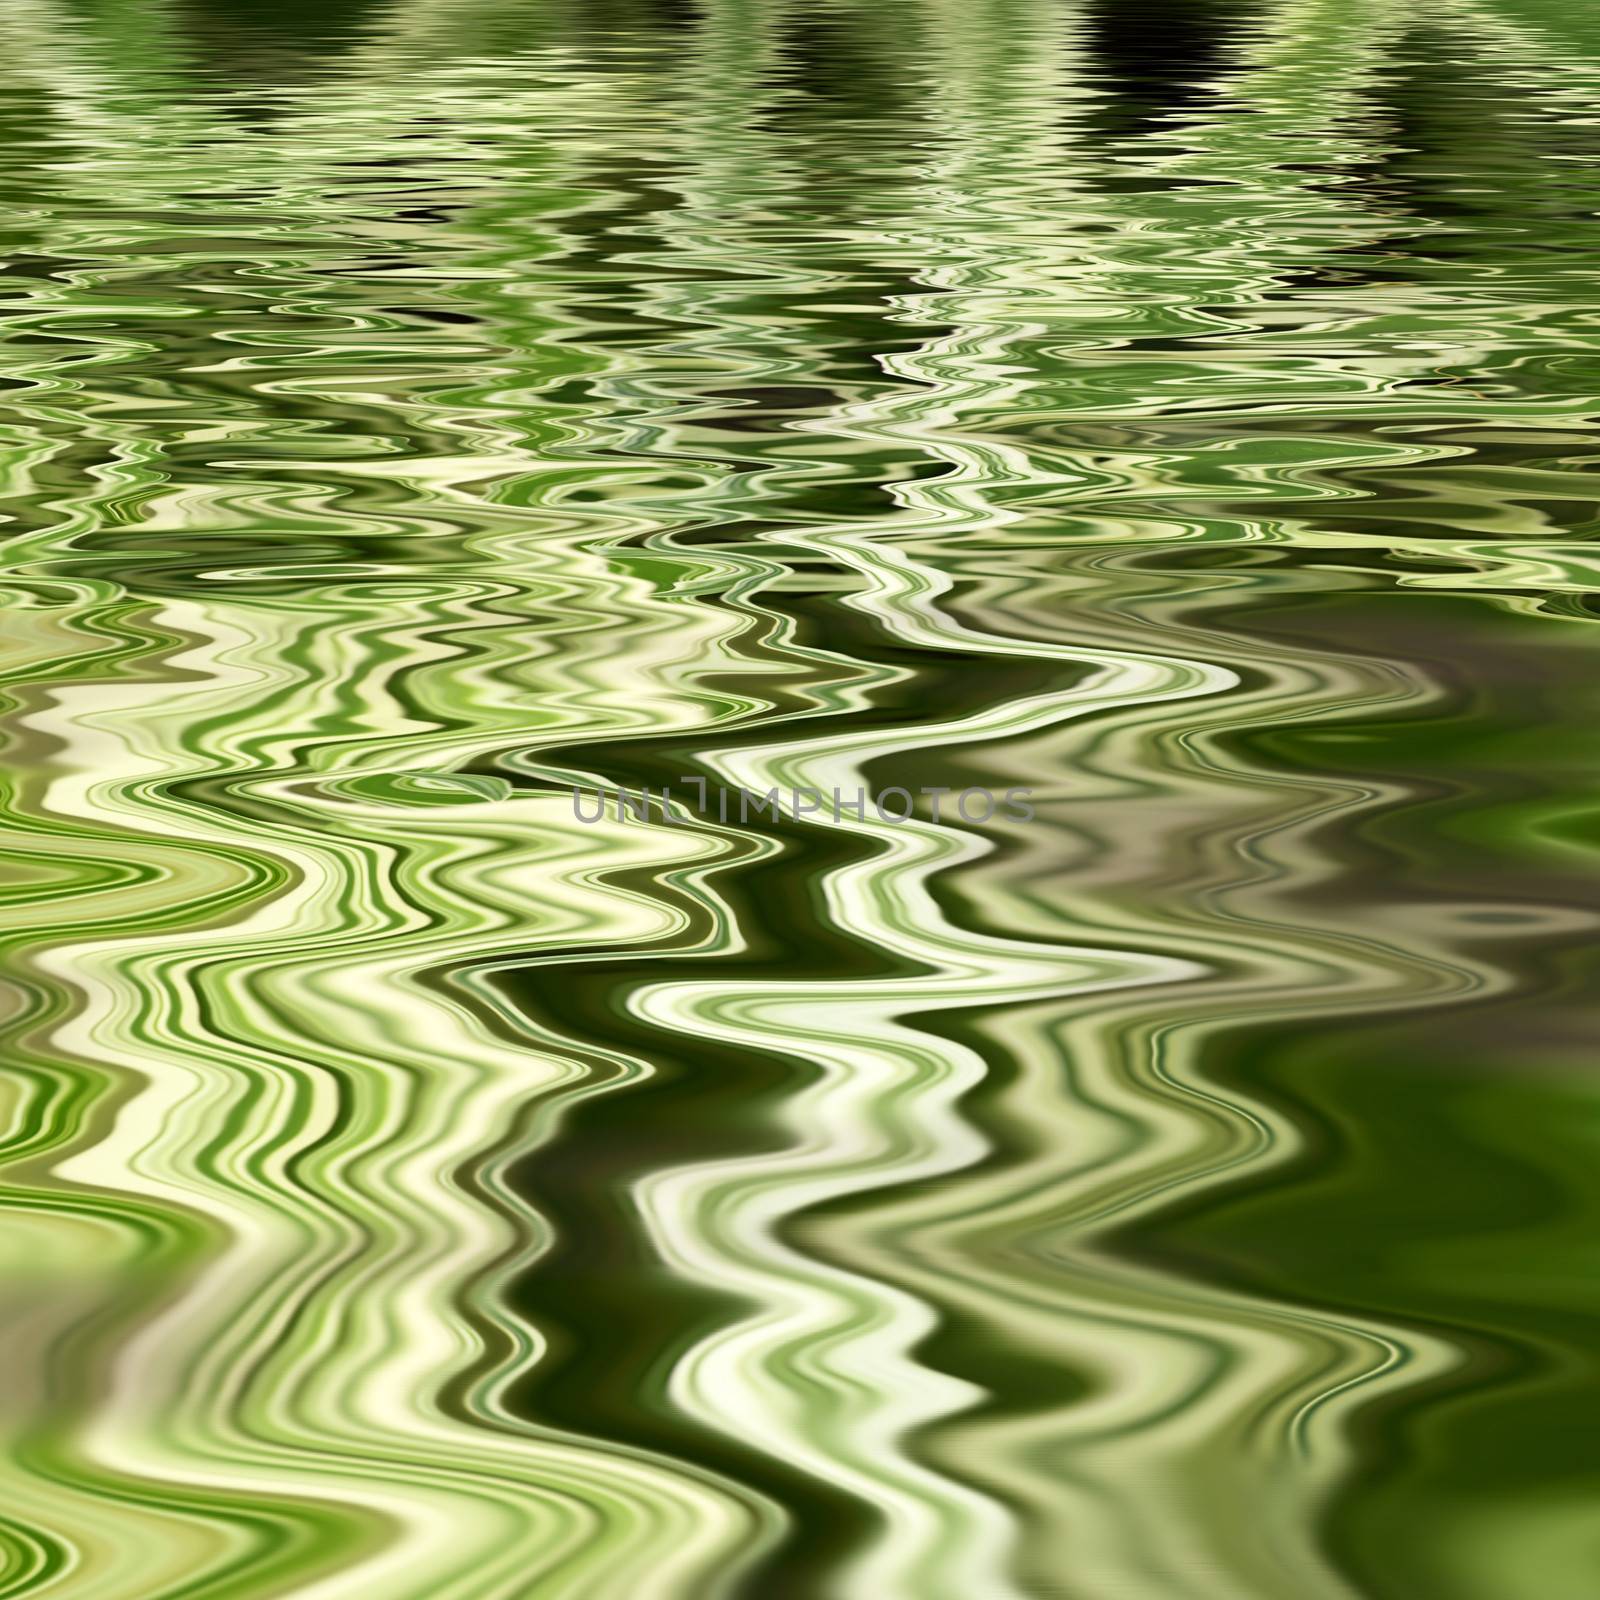 Rippling green reflections on the surface of water forming dynamic flowing zig-zag patterns for s fresh pure backgorund conceptual of health and wellbeing